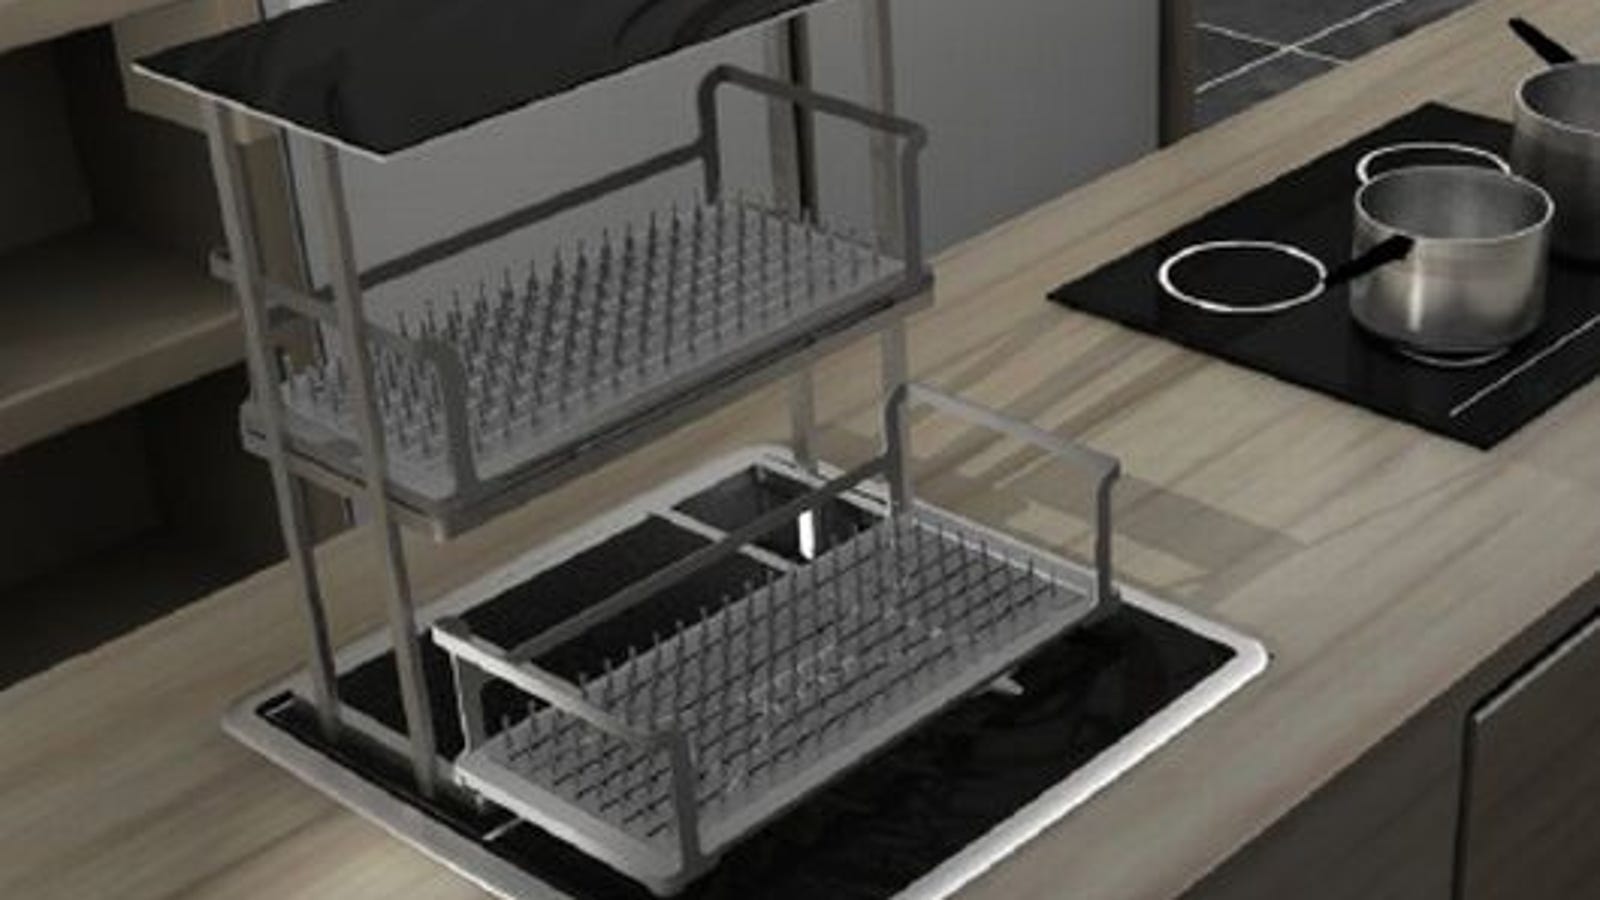 Ultrasonic Dishwasher Cavitates Your Dishes To Cleanliness